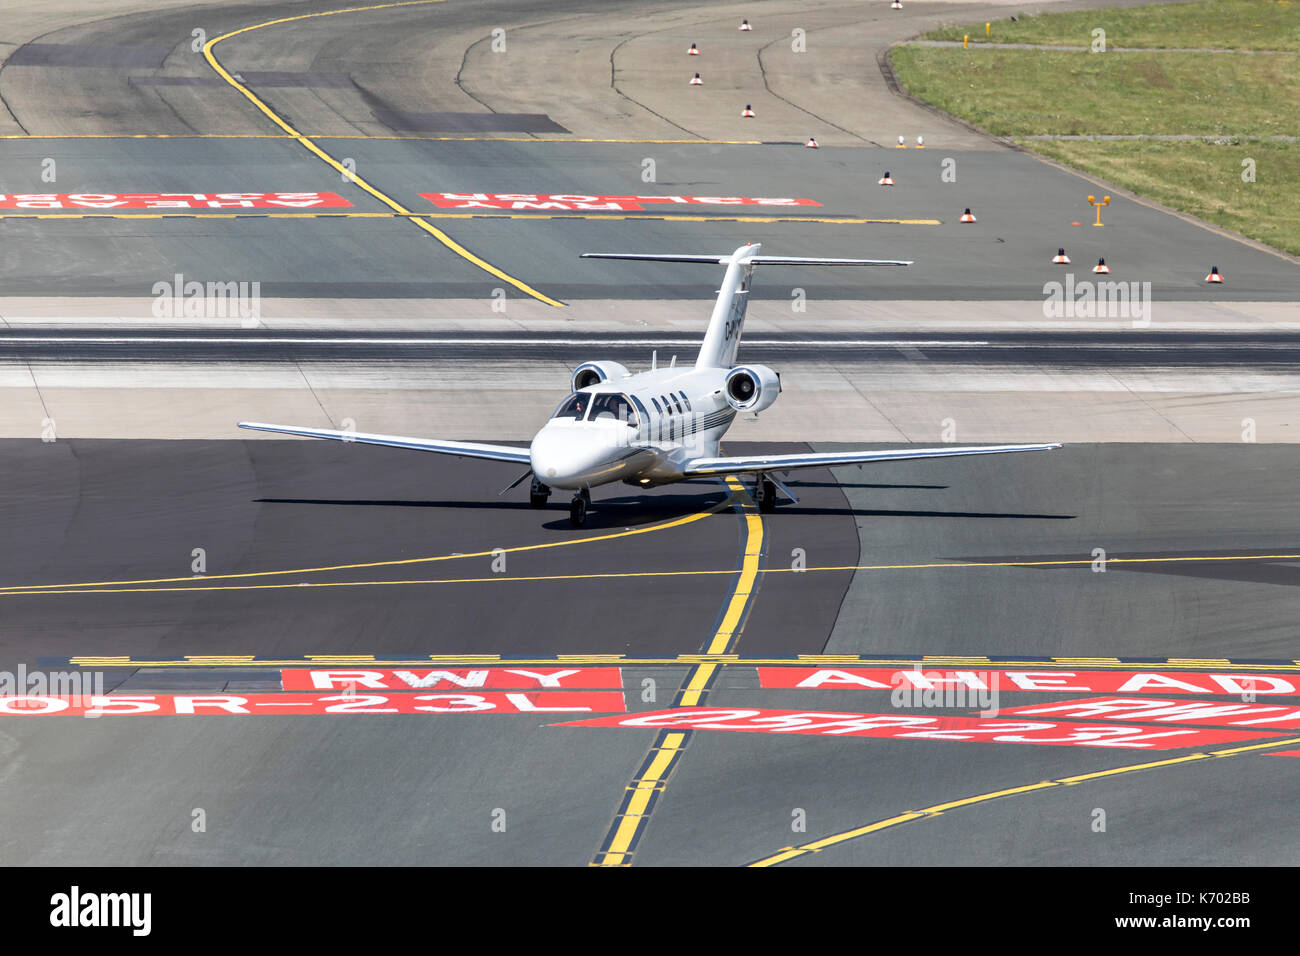 DŸsseldorf International Airport, Germany, marks on the taxiway, signpost, private jet plane Stock Photo